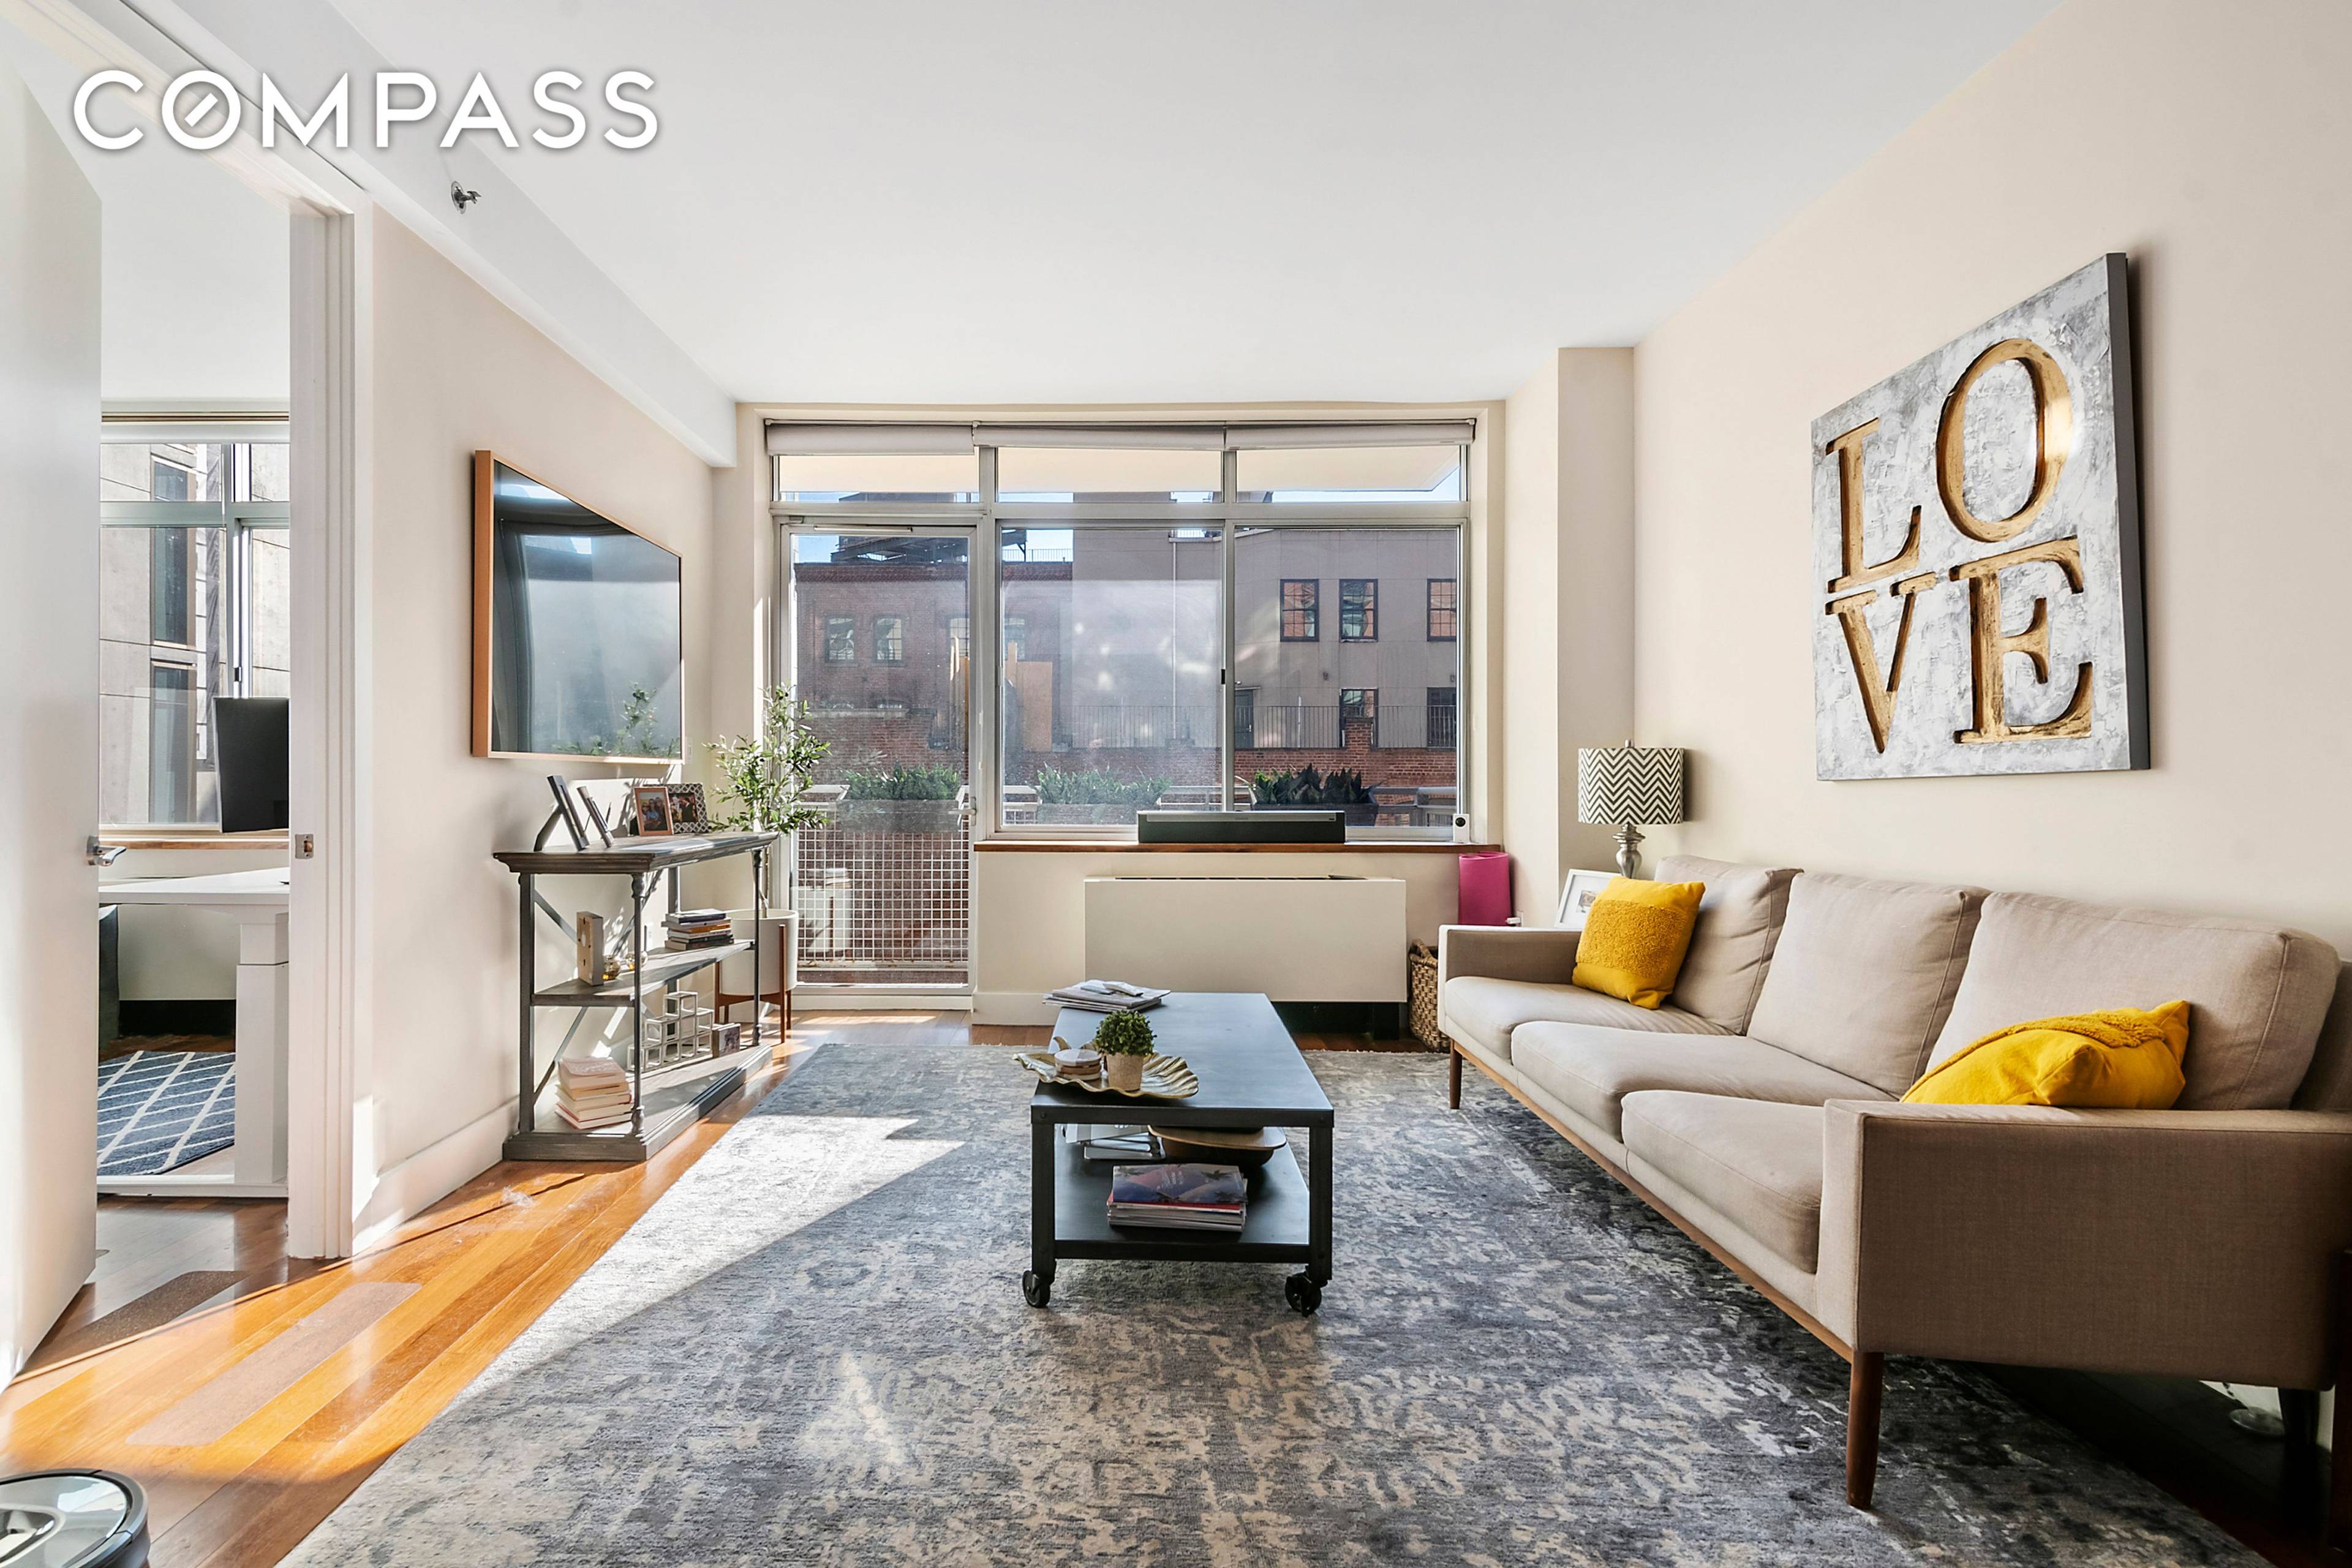 Beautiful, sunny 2 bedroom 2 bath apartment with private balcony is located in The Nexus, a luxury condominium in the heart of DUMBO, Brooklyn.